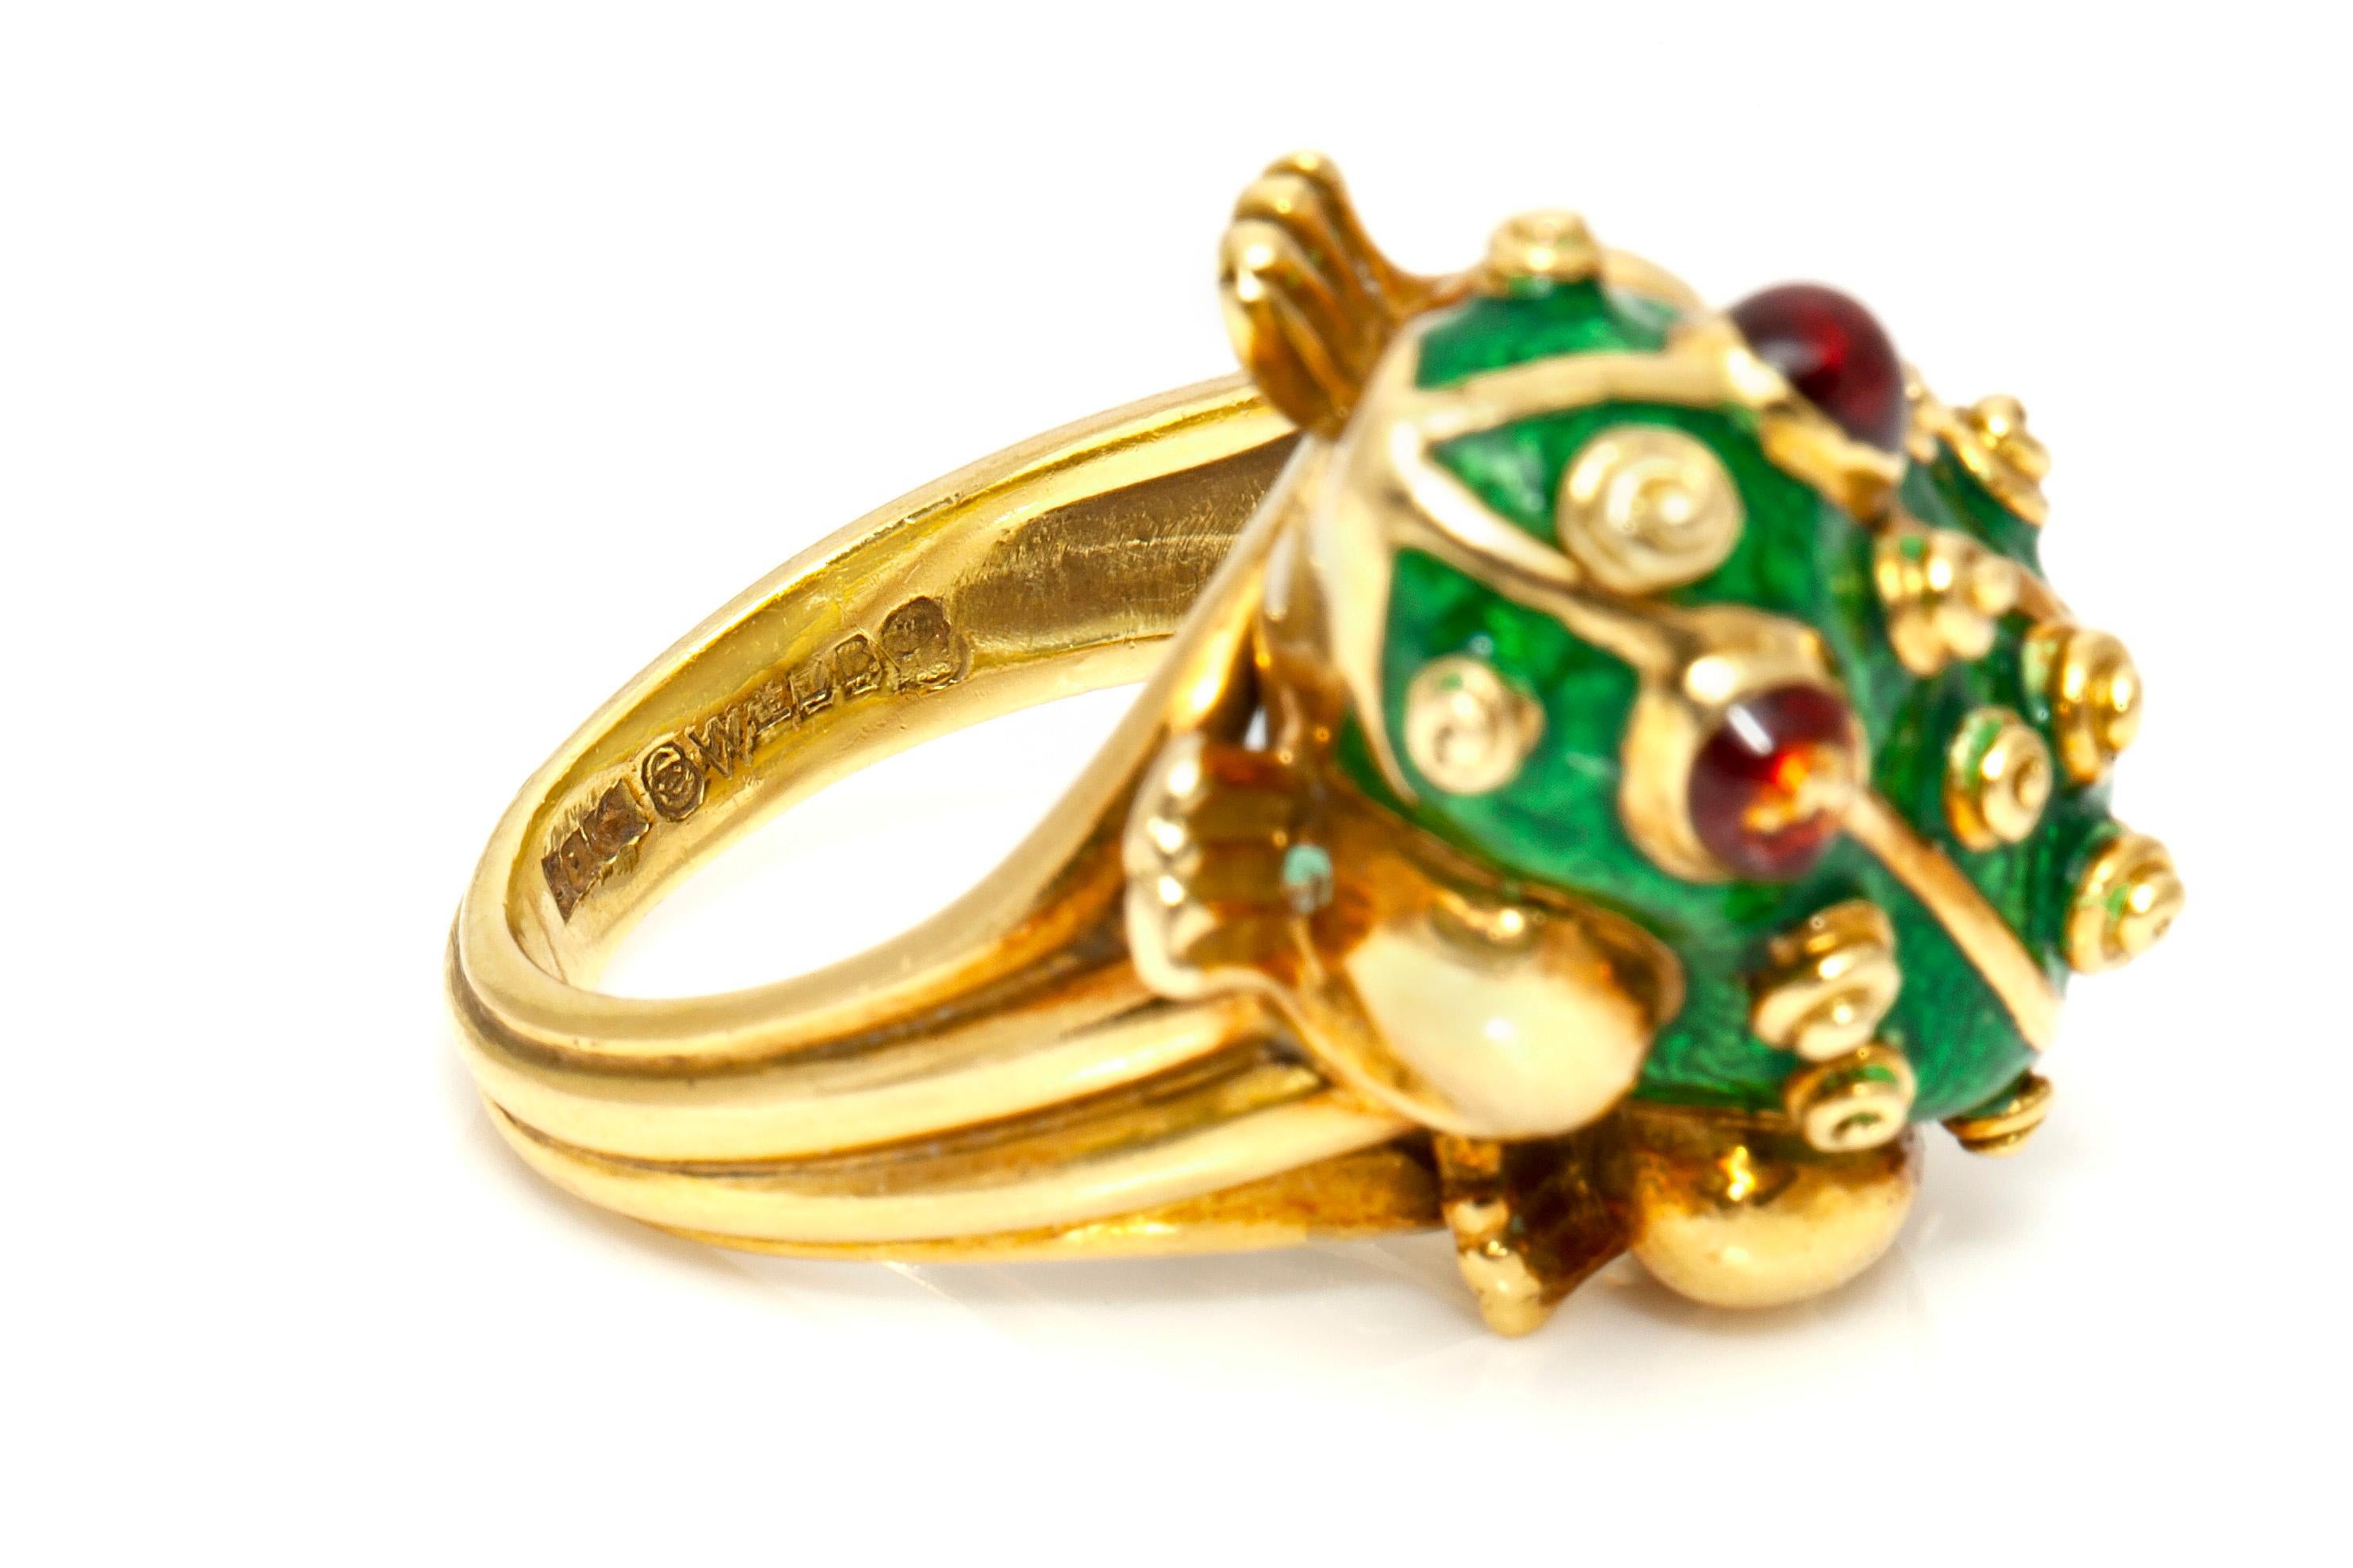 Frog ring, finely crafted in 18k yellow gold with green enamel coated body and cabochon-cut ruby eyes. Signed by David Webb. Size 6,5.